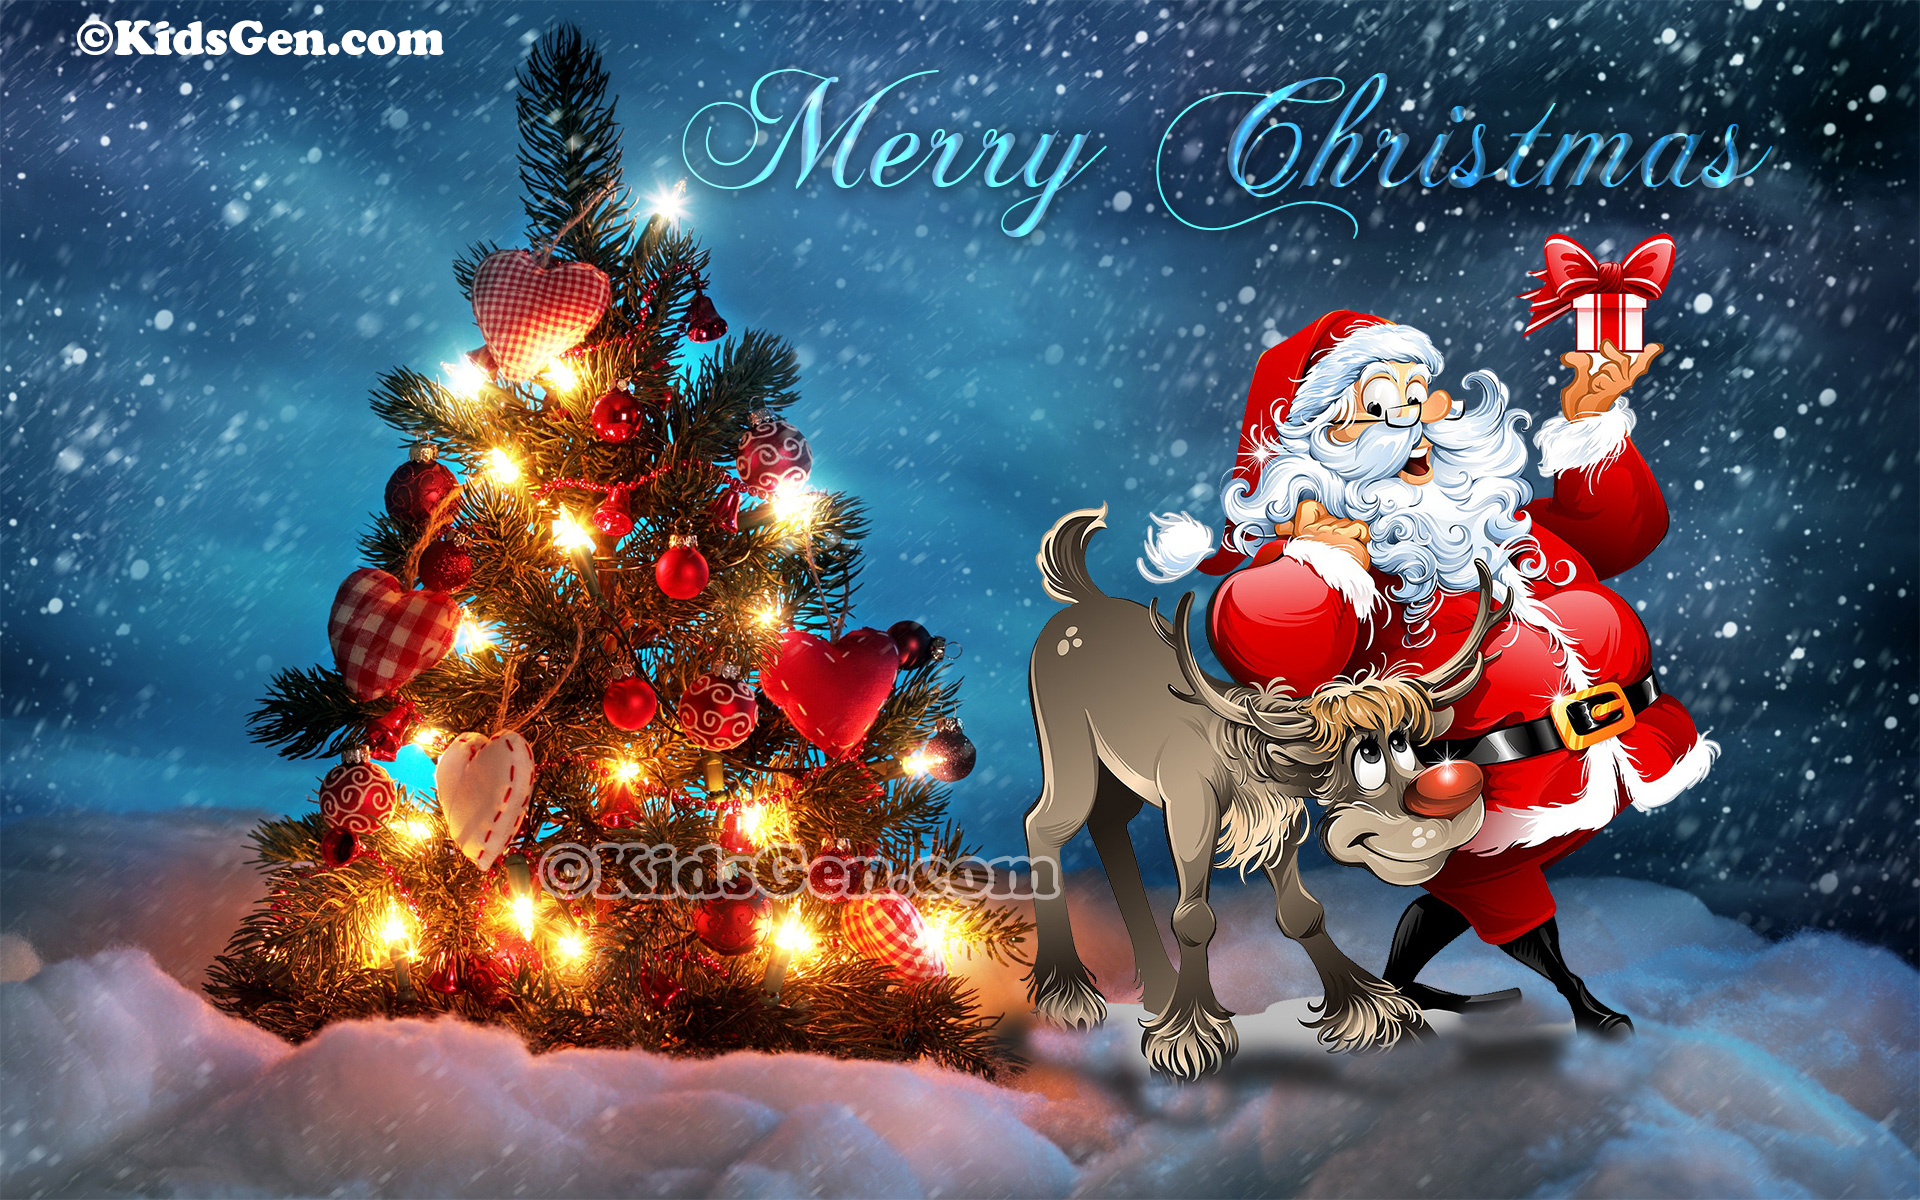 The Best Christmas Wallpapers for PC  Smartphone  Tablet  PCstepscom